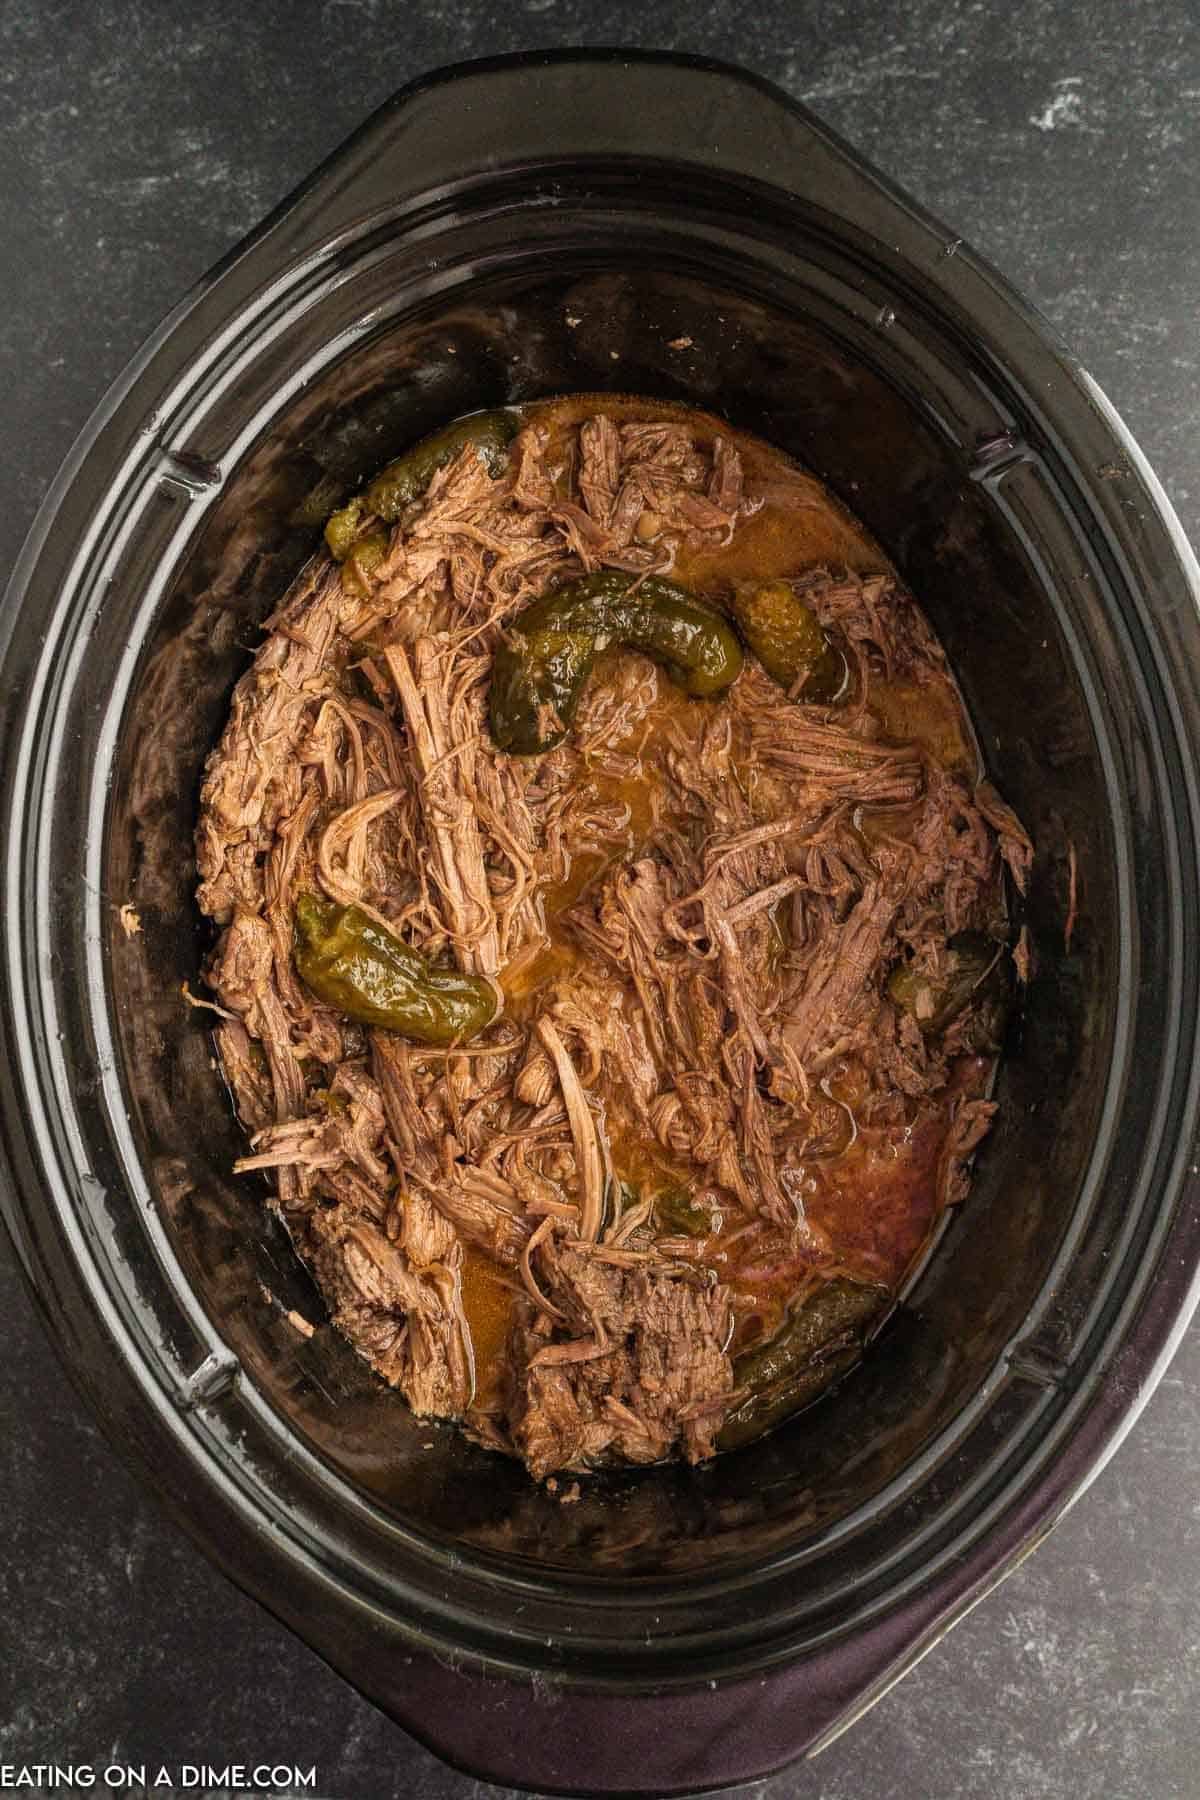 Shredded meat in the slow cooker 